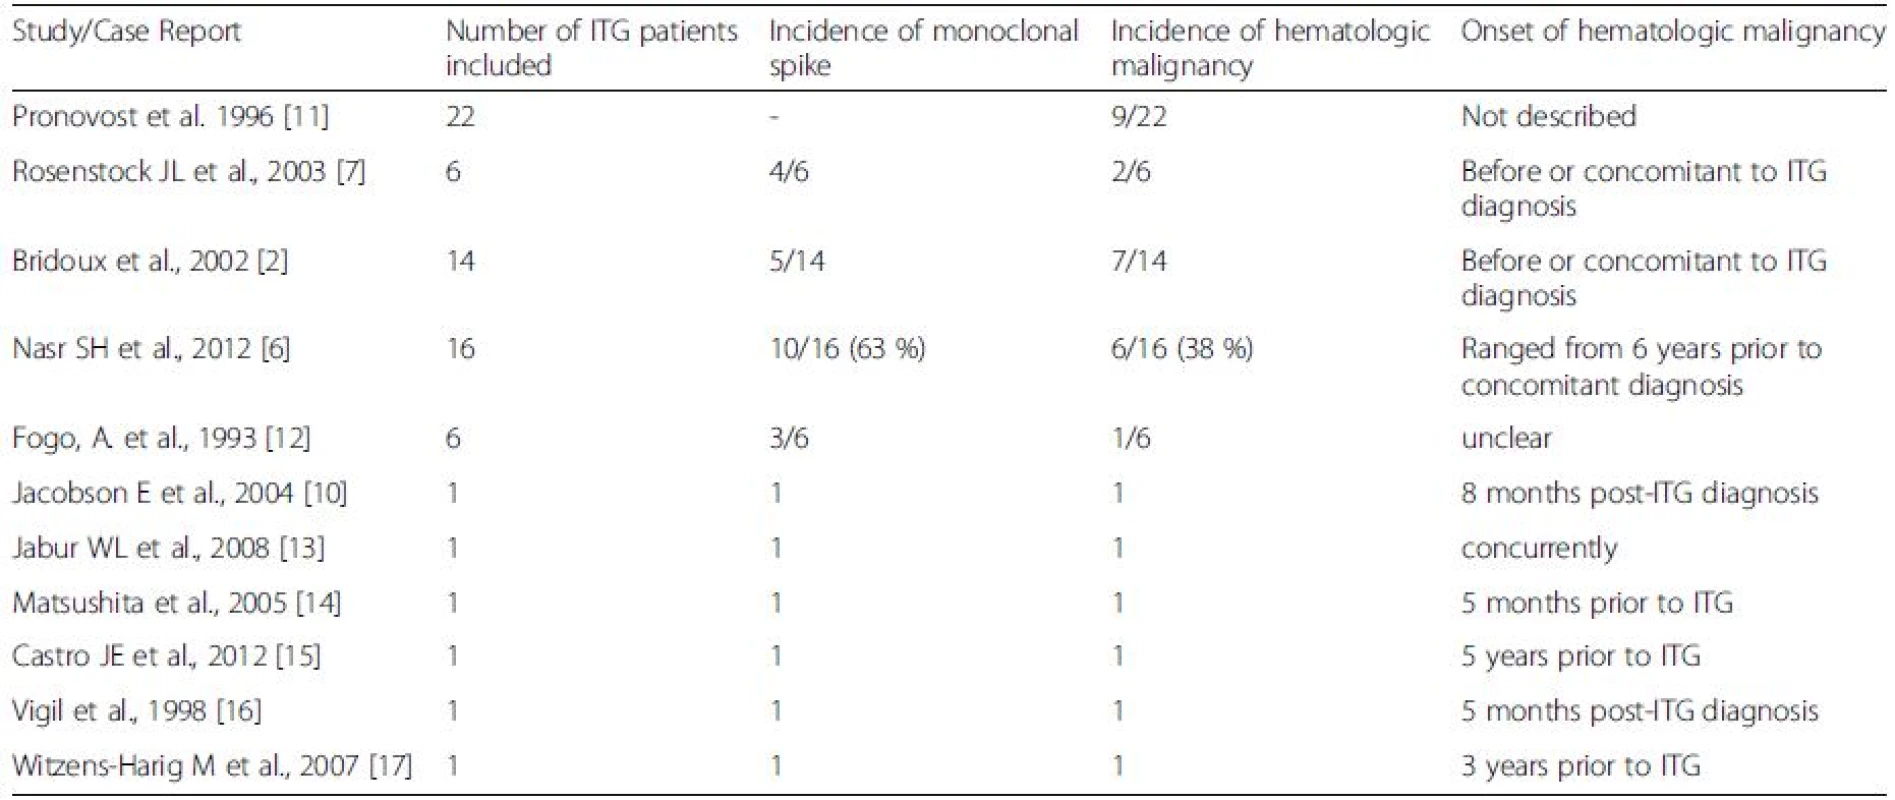 Incidence and timing of hematologic malignancy onset in patients diagnosed with Immunotactoid glomerulonephropathy